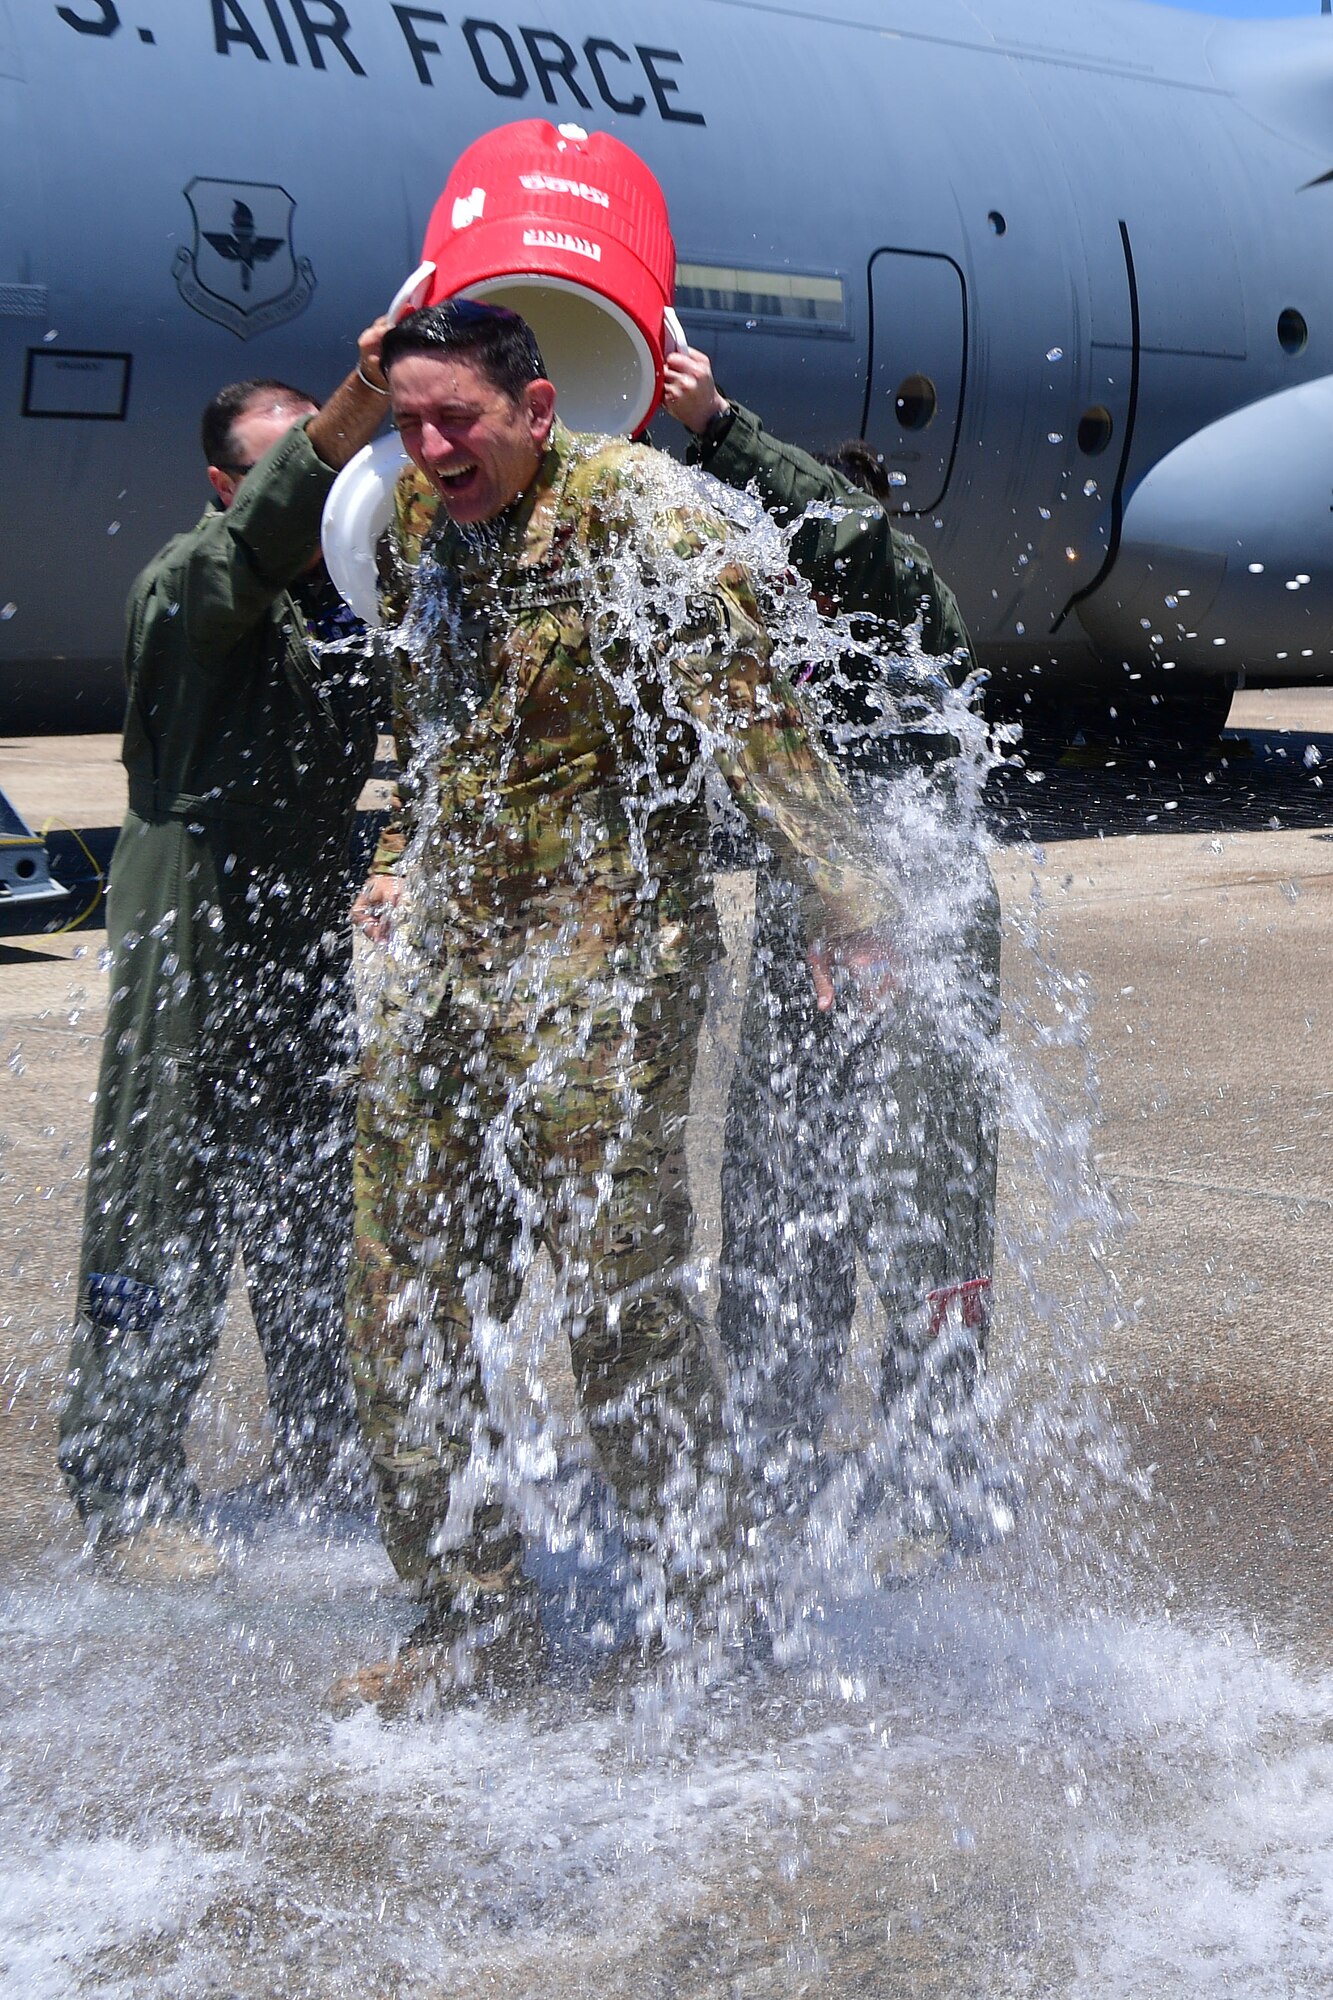 Col. Stephen Hodge, 314th Airlift Wing commander, gets a bucket of water dumped on him while exiting a C-130J Super Hercules upon completing his final flight as commander of the wing at Little Rock Air Force Base, Arkansas, June 12, 2020. Hodge is a command pilot with 3,500 hours of flight time, primarily in the C-130. He led missions during Operations Joint Endeavor, Southern Watch, Enduring Freedom and Iraqi Freedom. (U.S. Air Force photo by Airman 1st Class Aaron Irvin)